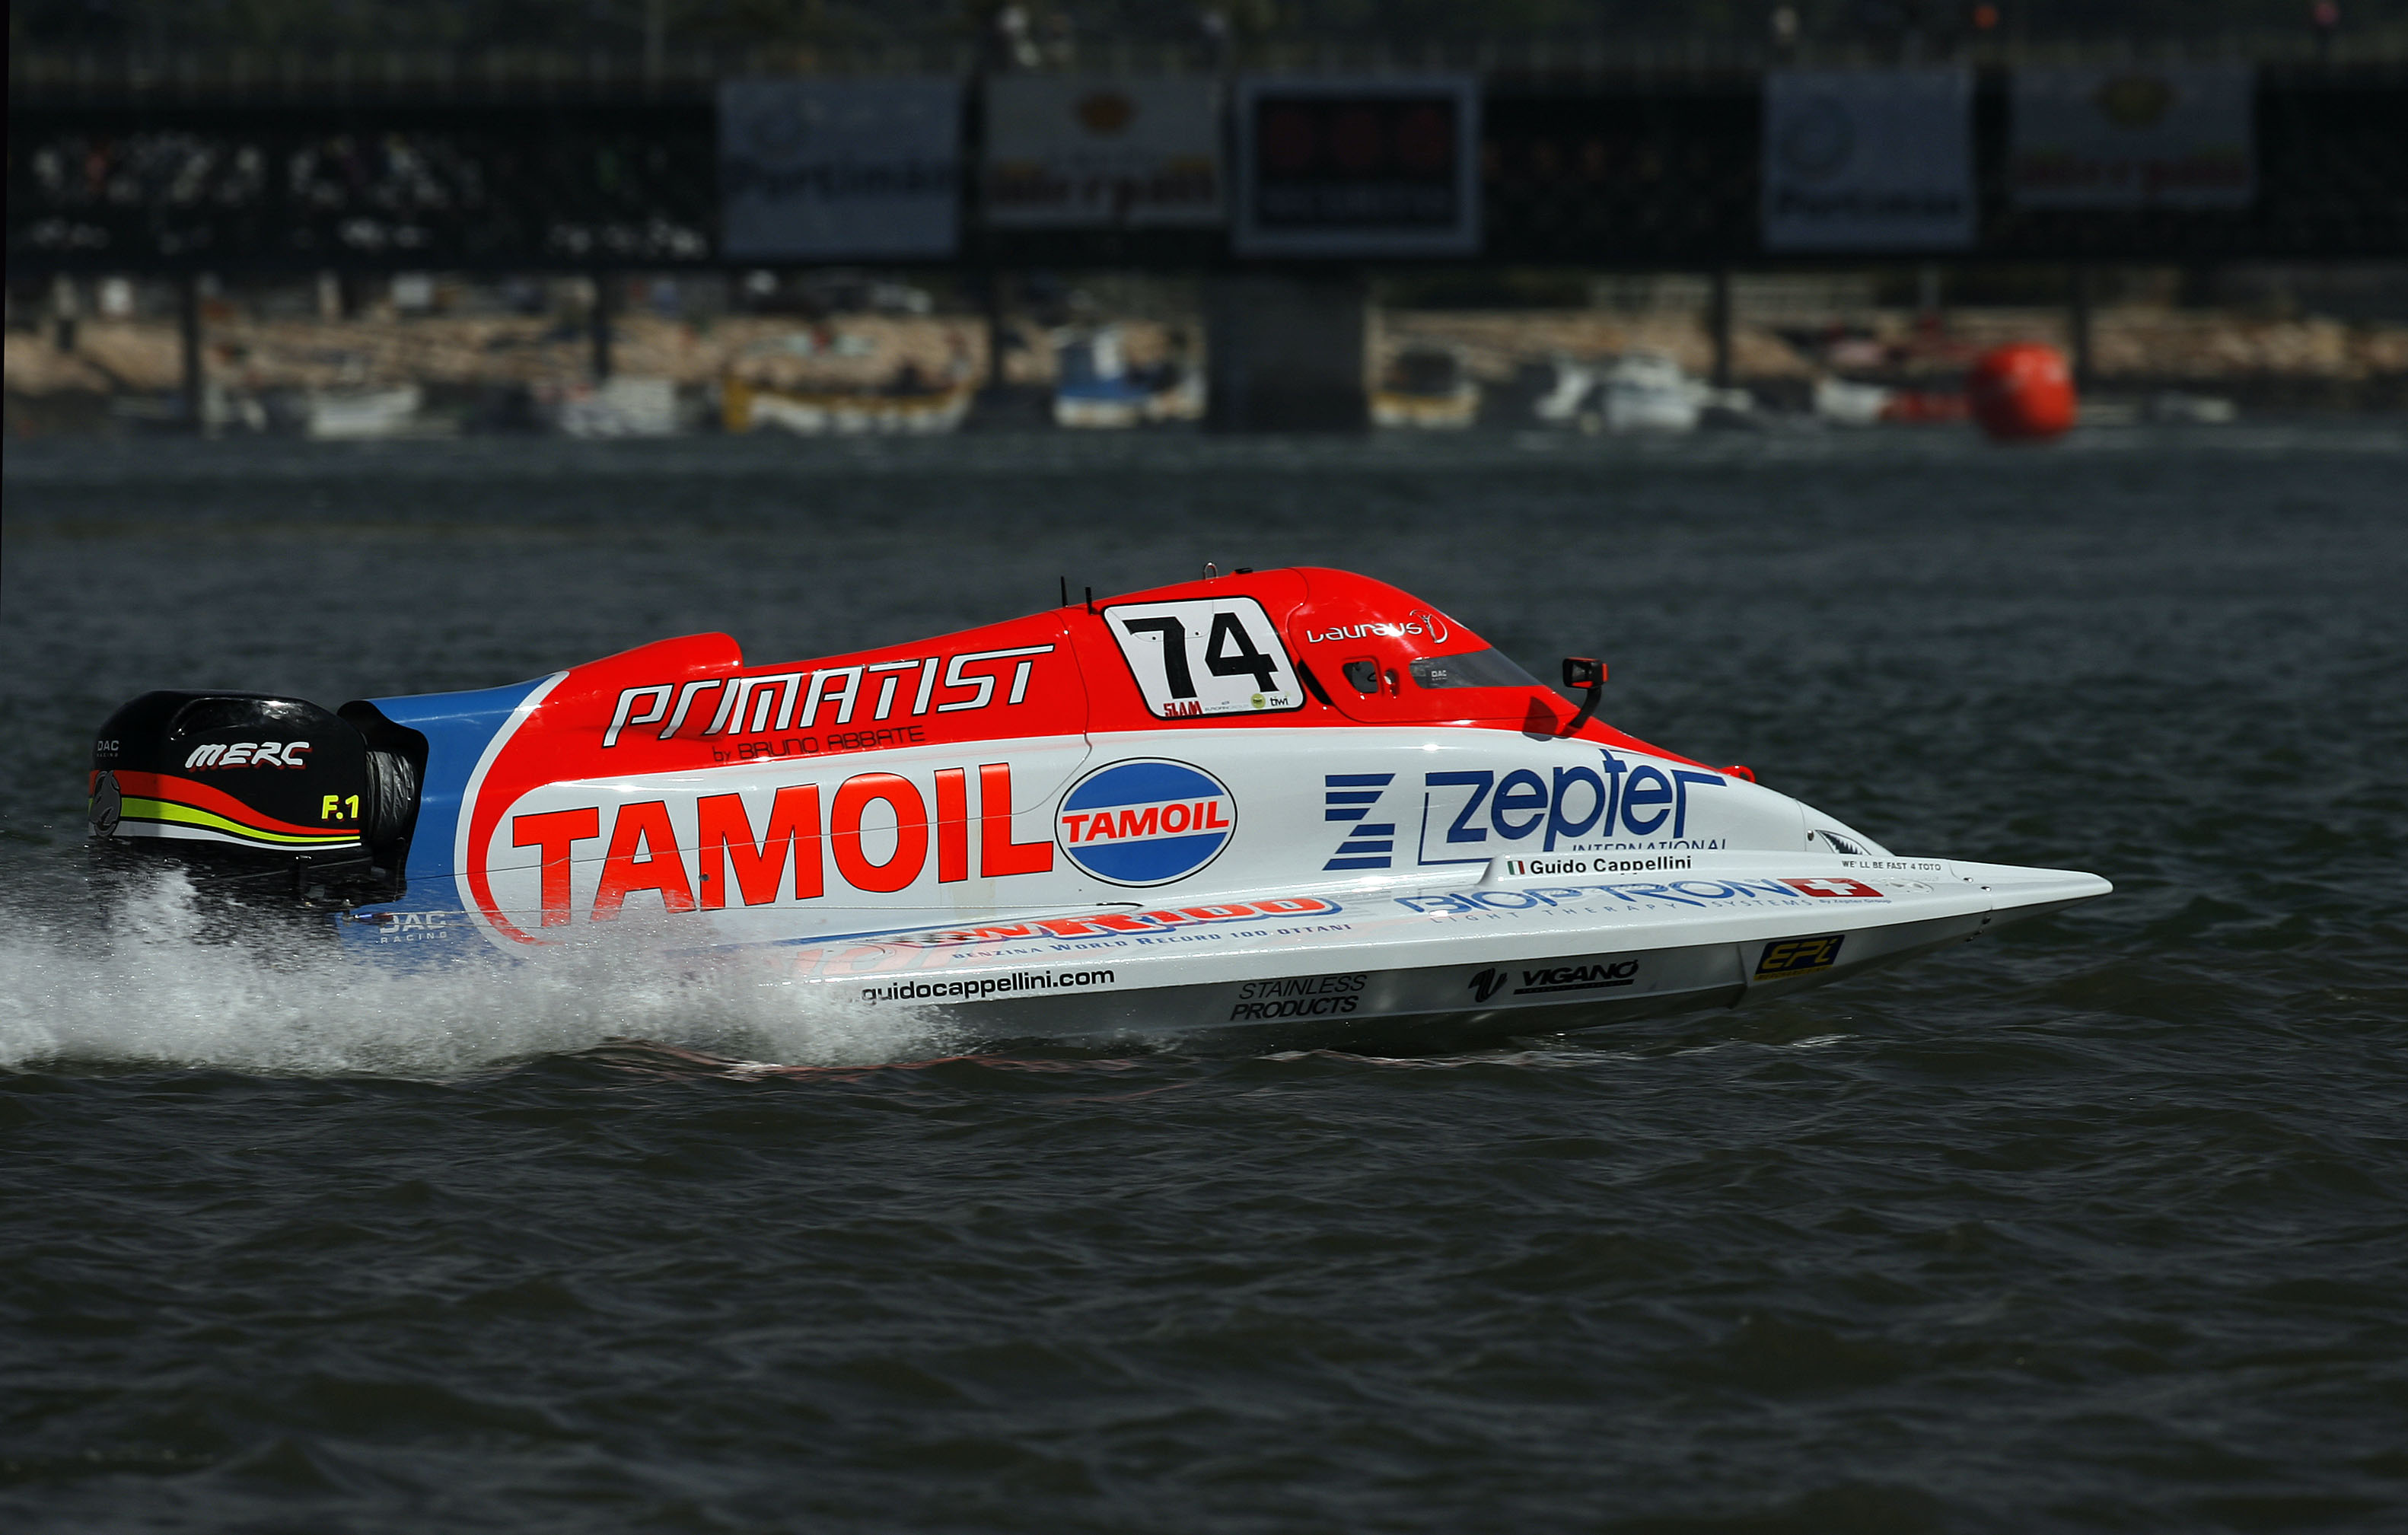 020508-GP OF PORTUGAL-PL- Guido Cappallini of Italy of the Tamoil F1 powerboat team pictured in action at the UIM F1 Powerboat Grand prix of Portugal, Portimao, Portugal, the 2nd leg of the championship series. Picture by Paul Lakatos/Idea Marketing.